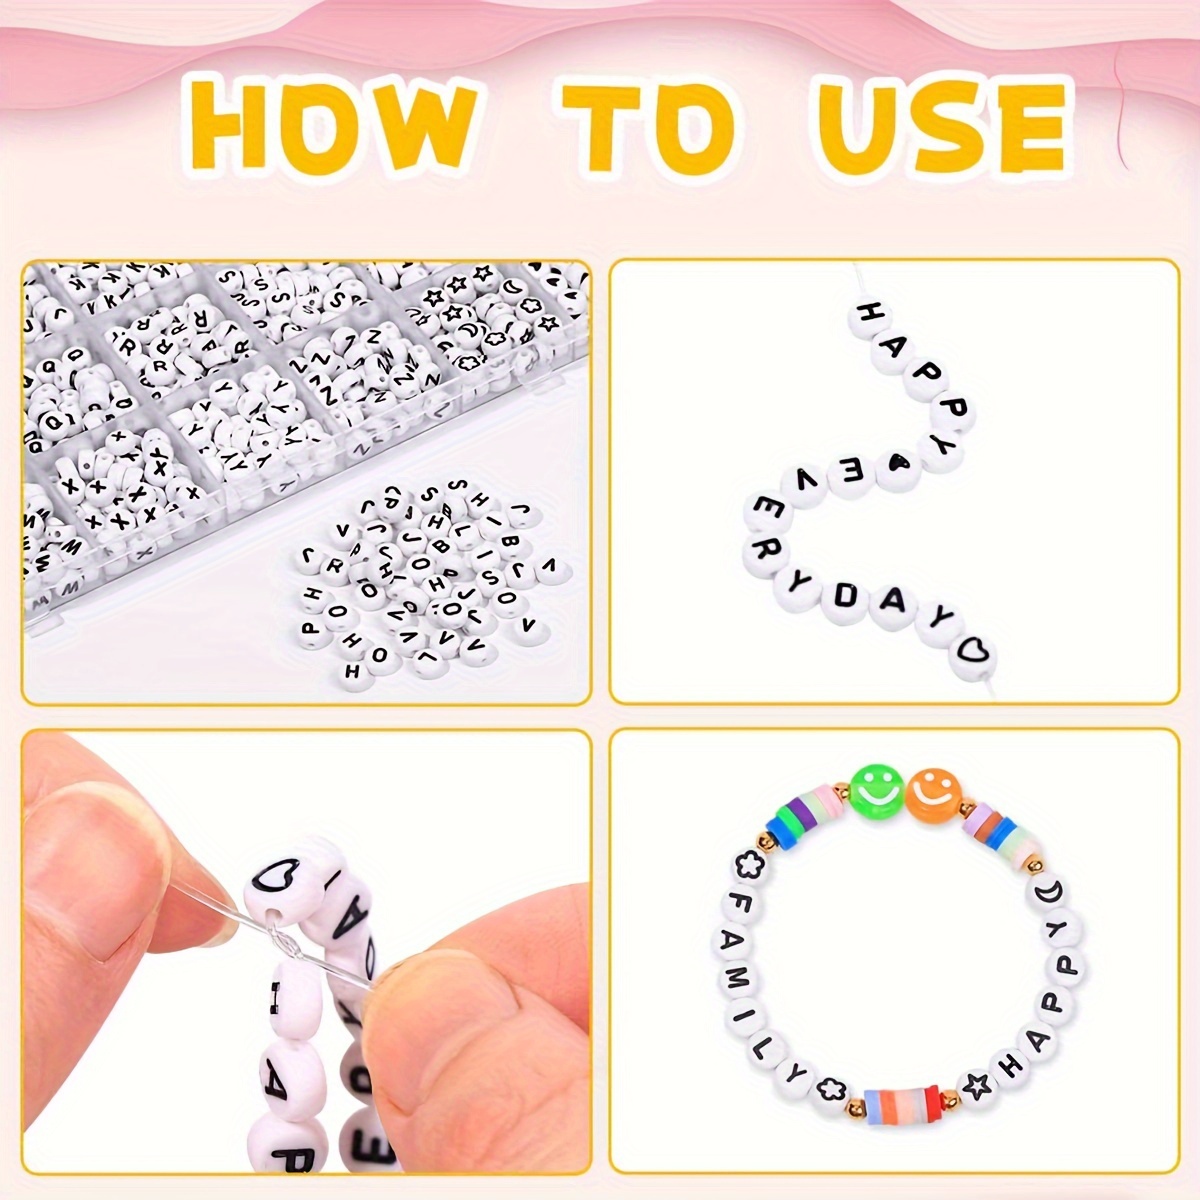 Adwzy Pack of 1400 Letter Beads Spacers 7 x 4 mm Letters A-Z Heart